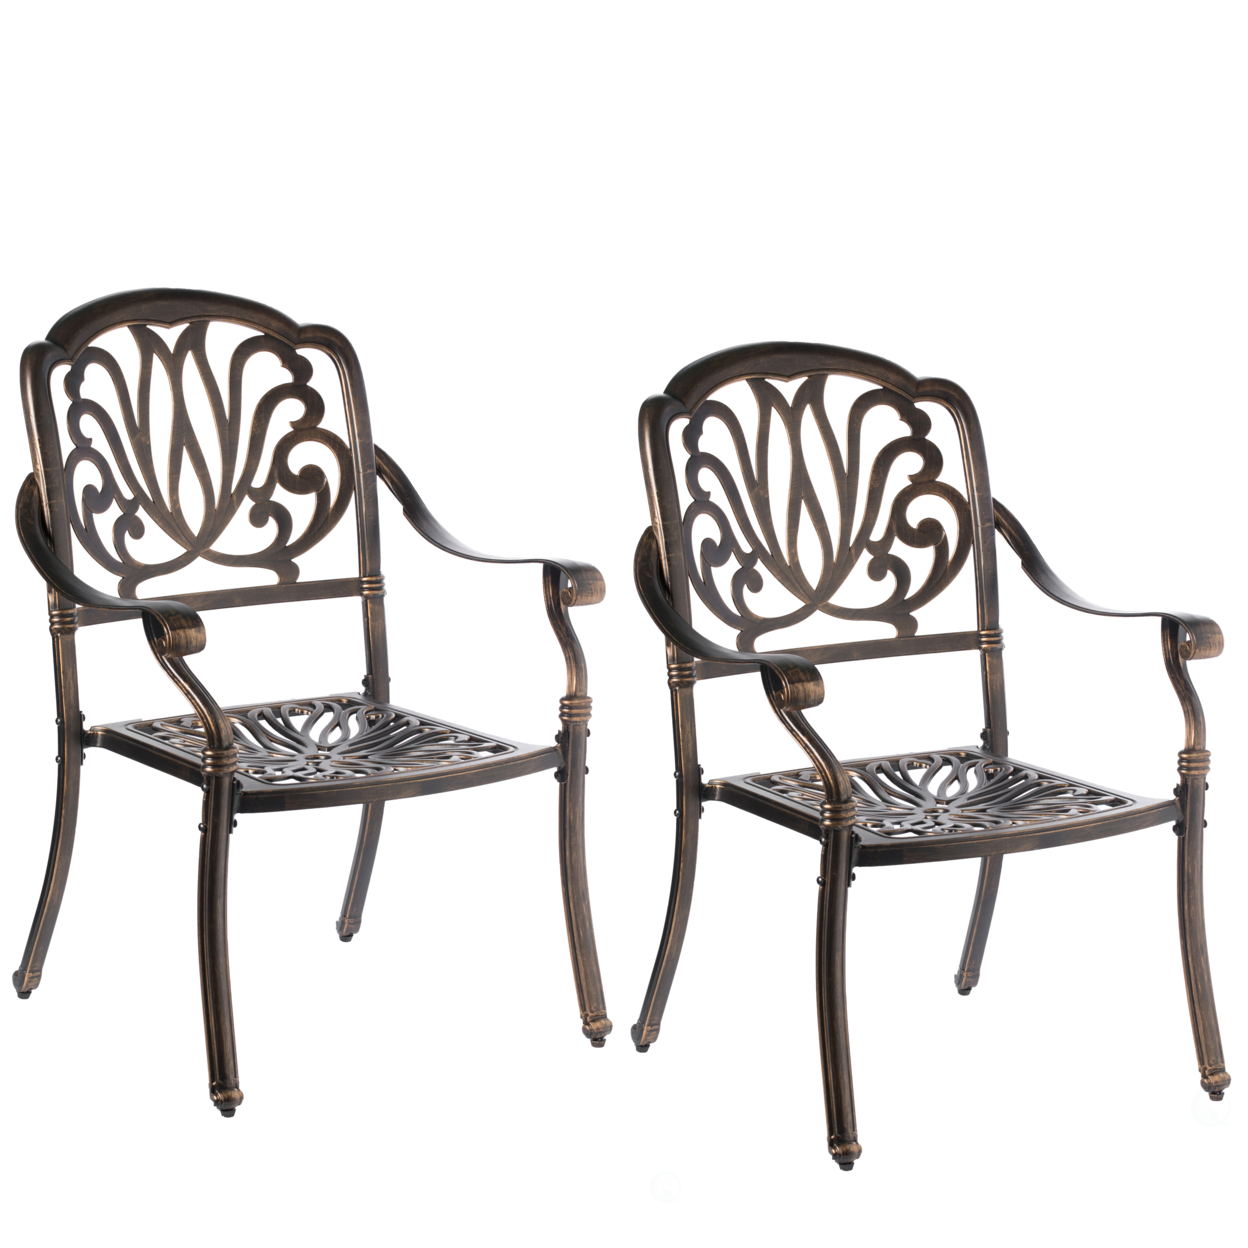 Indoor And Outdoor Bronze Dinning Set 2 Chairs With 1 Table Patio Cast Aluminum. - Chairs